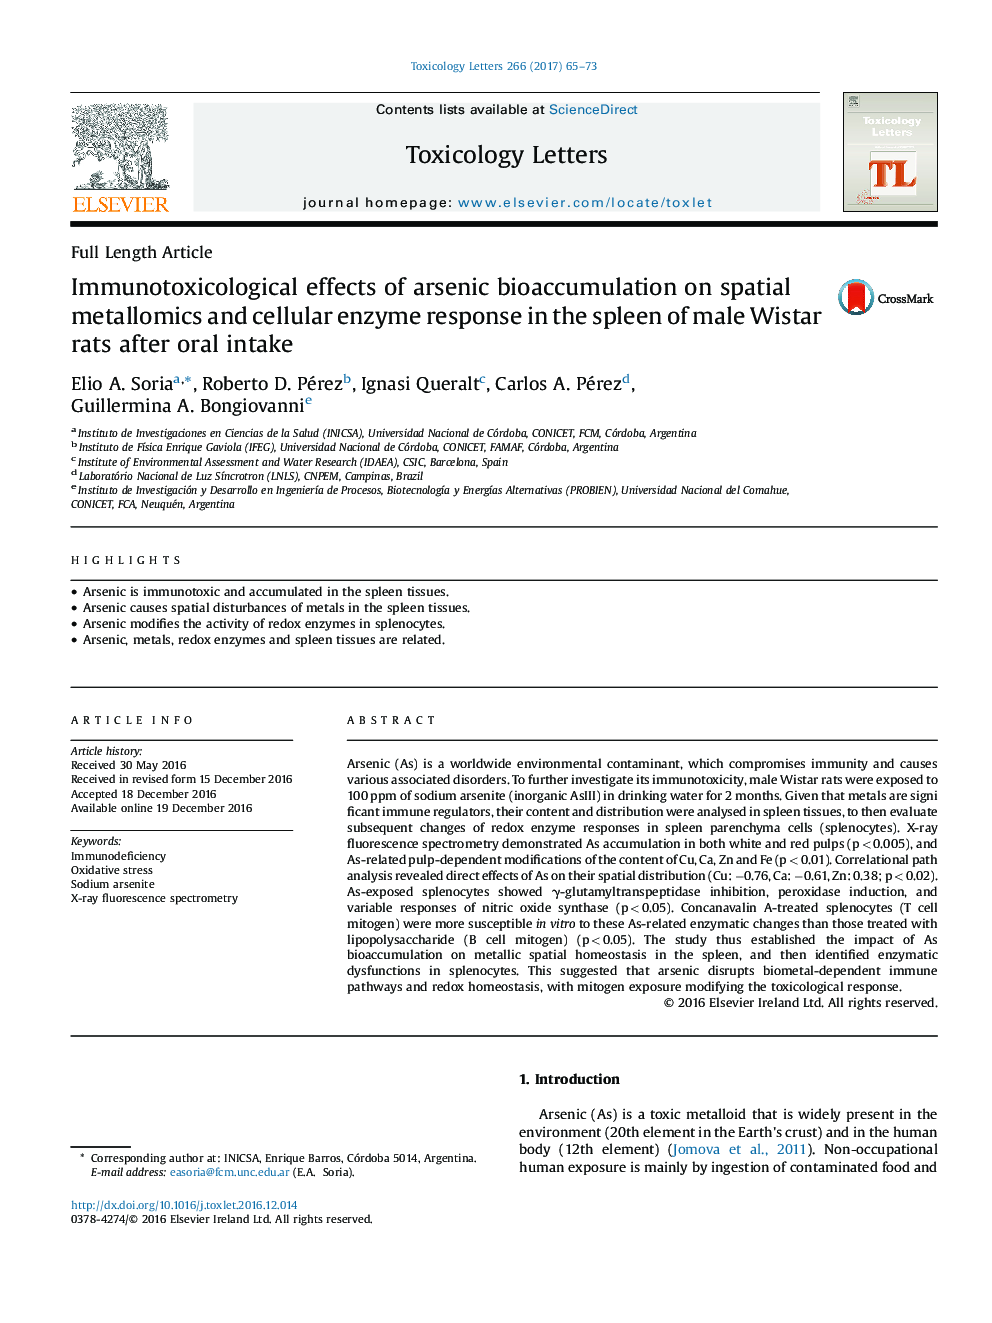 Immunotoxicological effects of arsenic bioaccumulation on spatial metallomics and cellular enzyme response in the spleen of male Wistar rats after oral intake